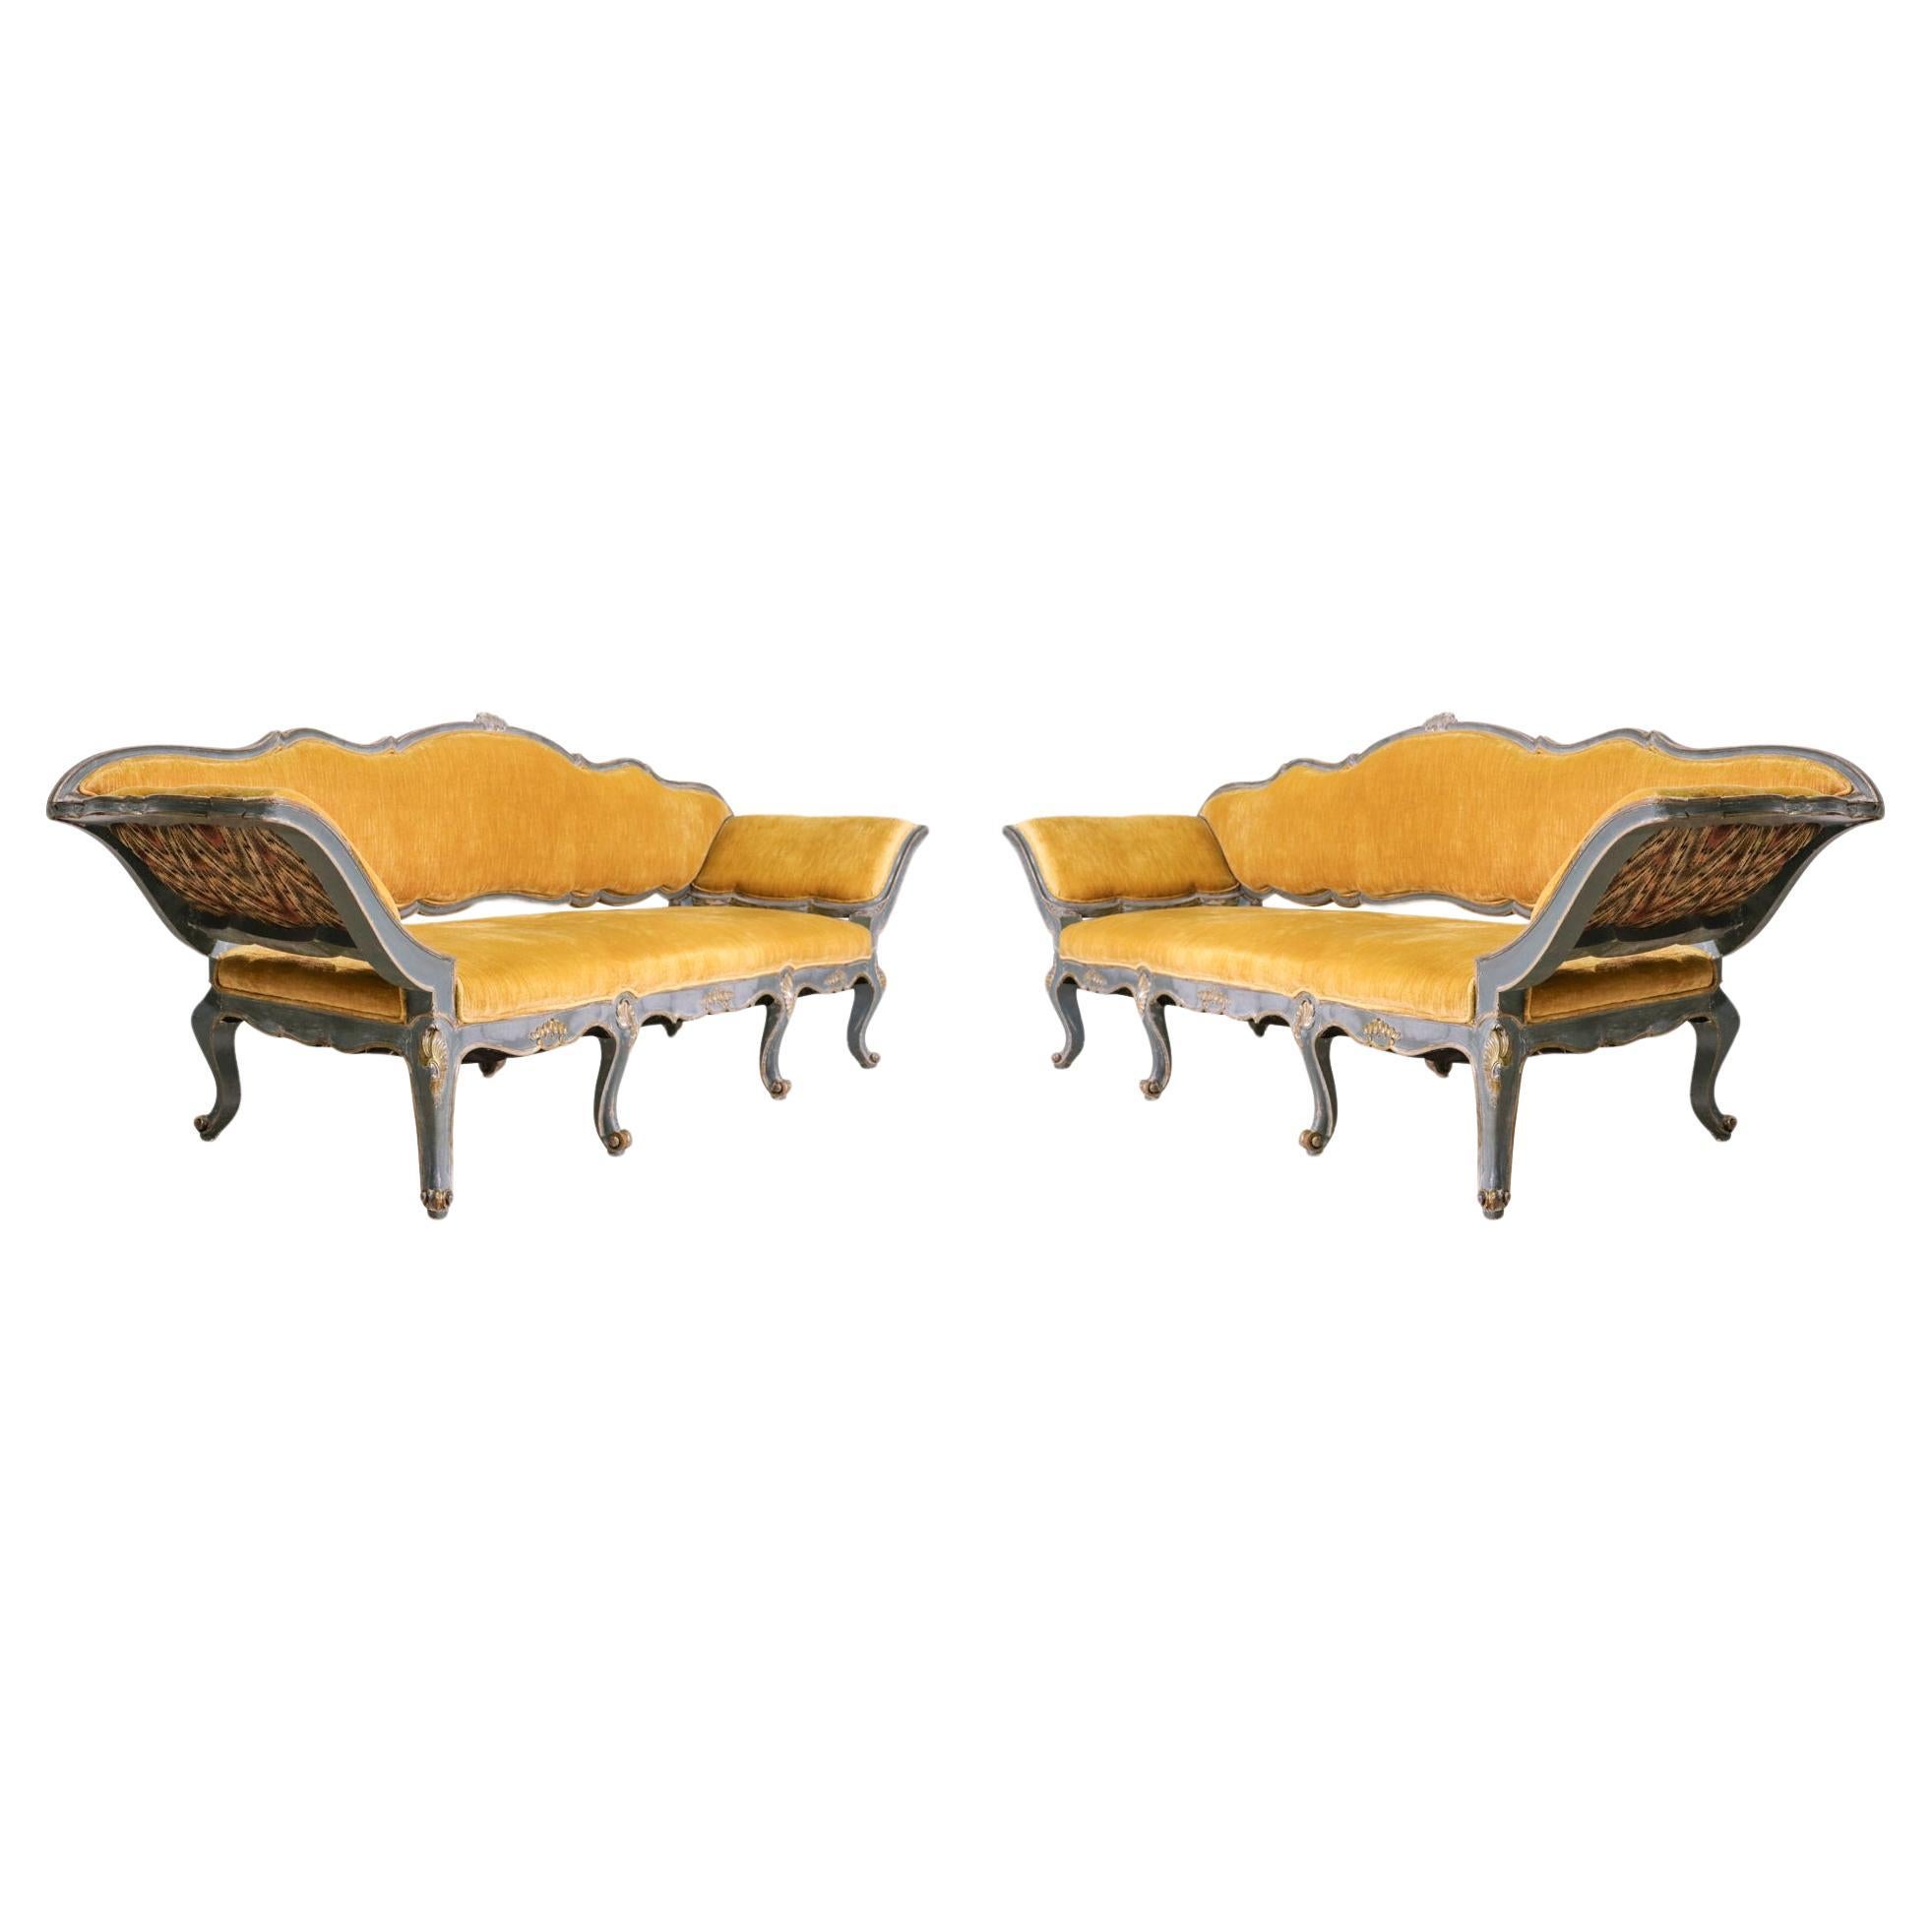 Pair of Venetian "Fan" Sofas with Mustard-Yellow Upholstery